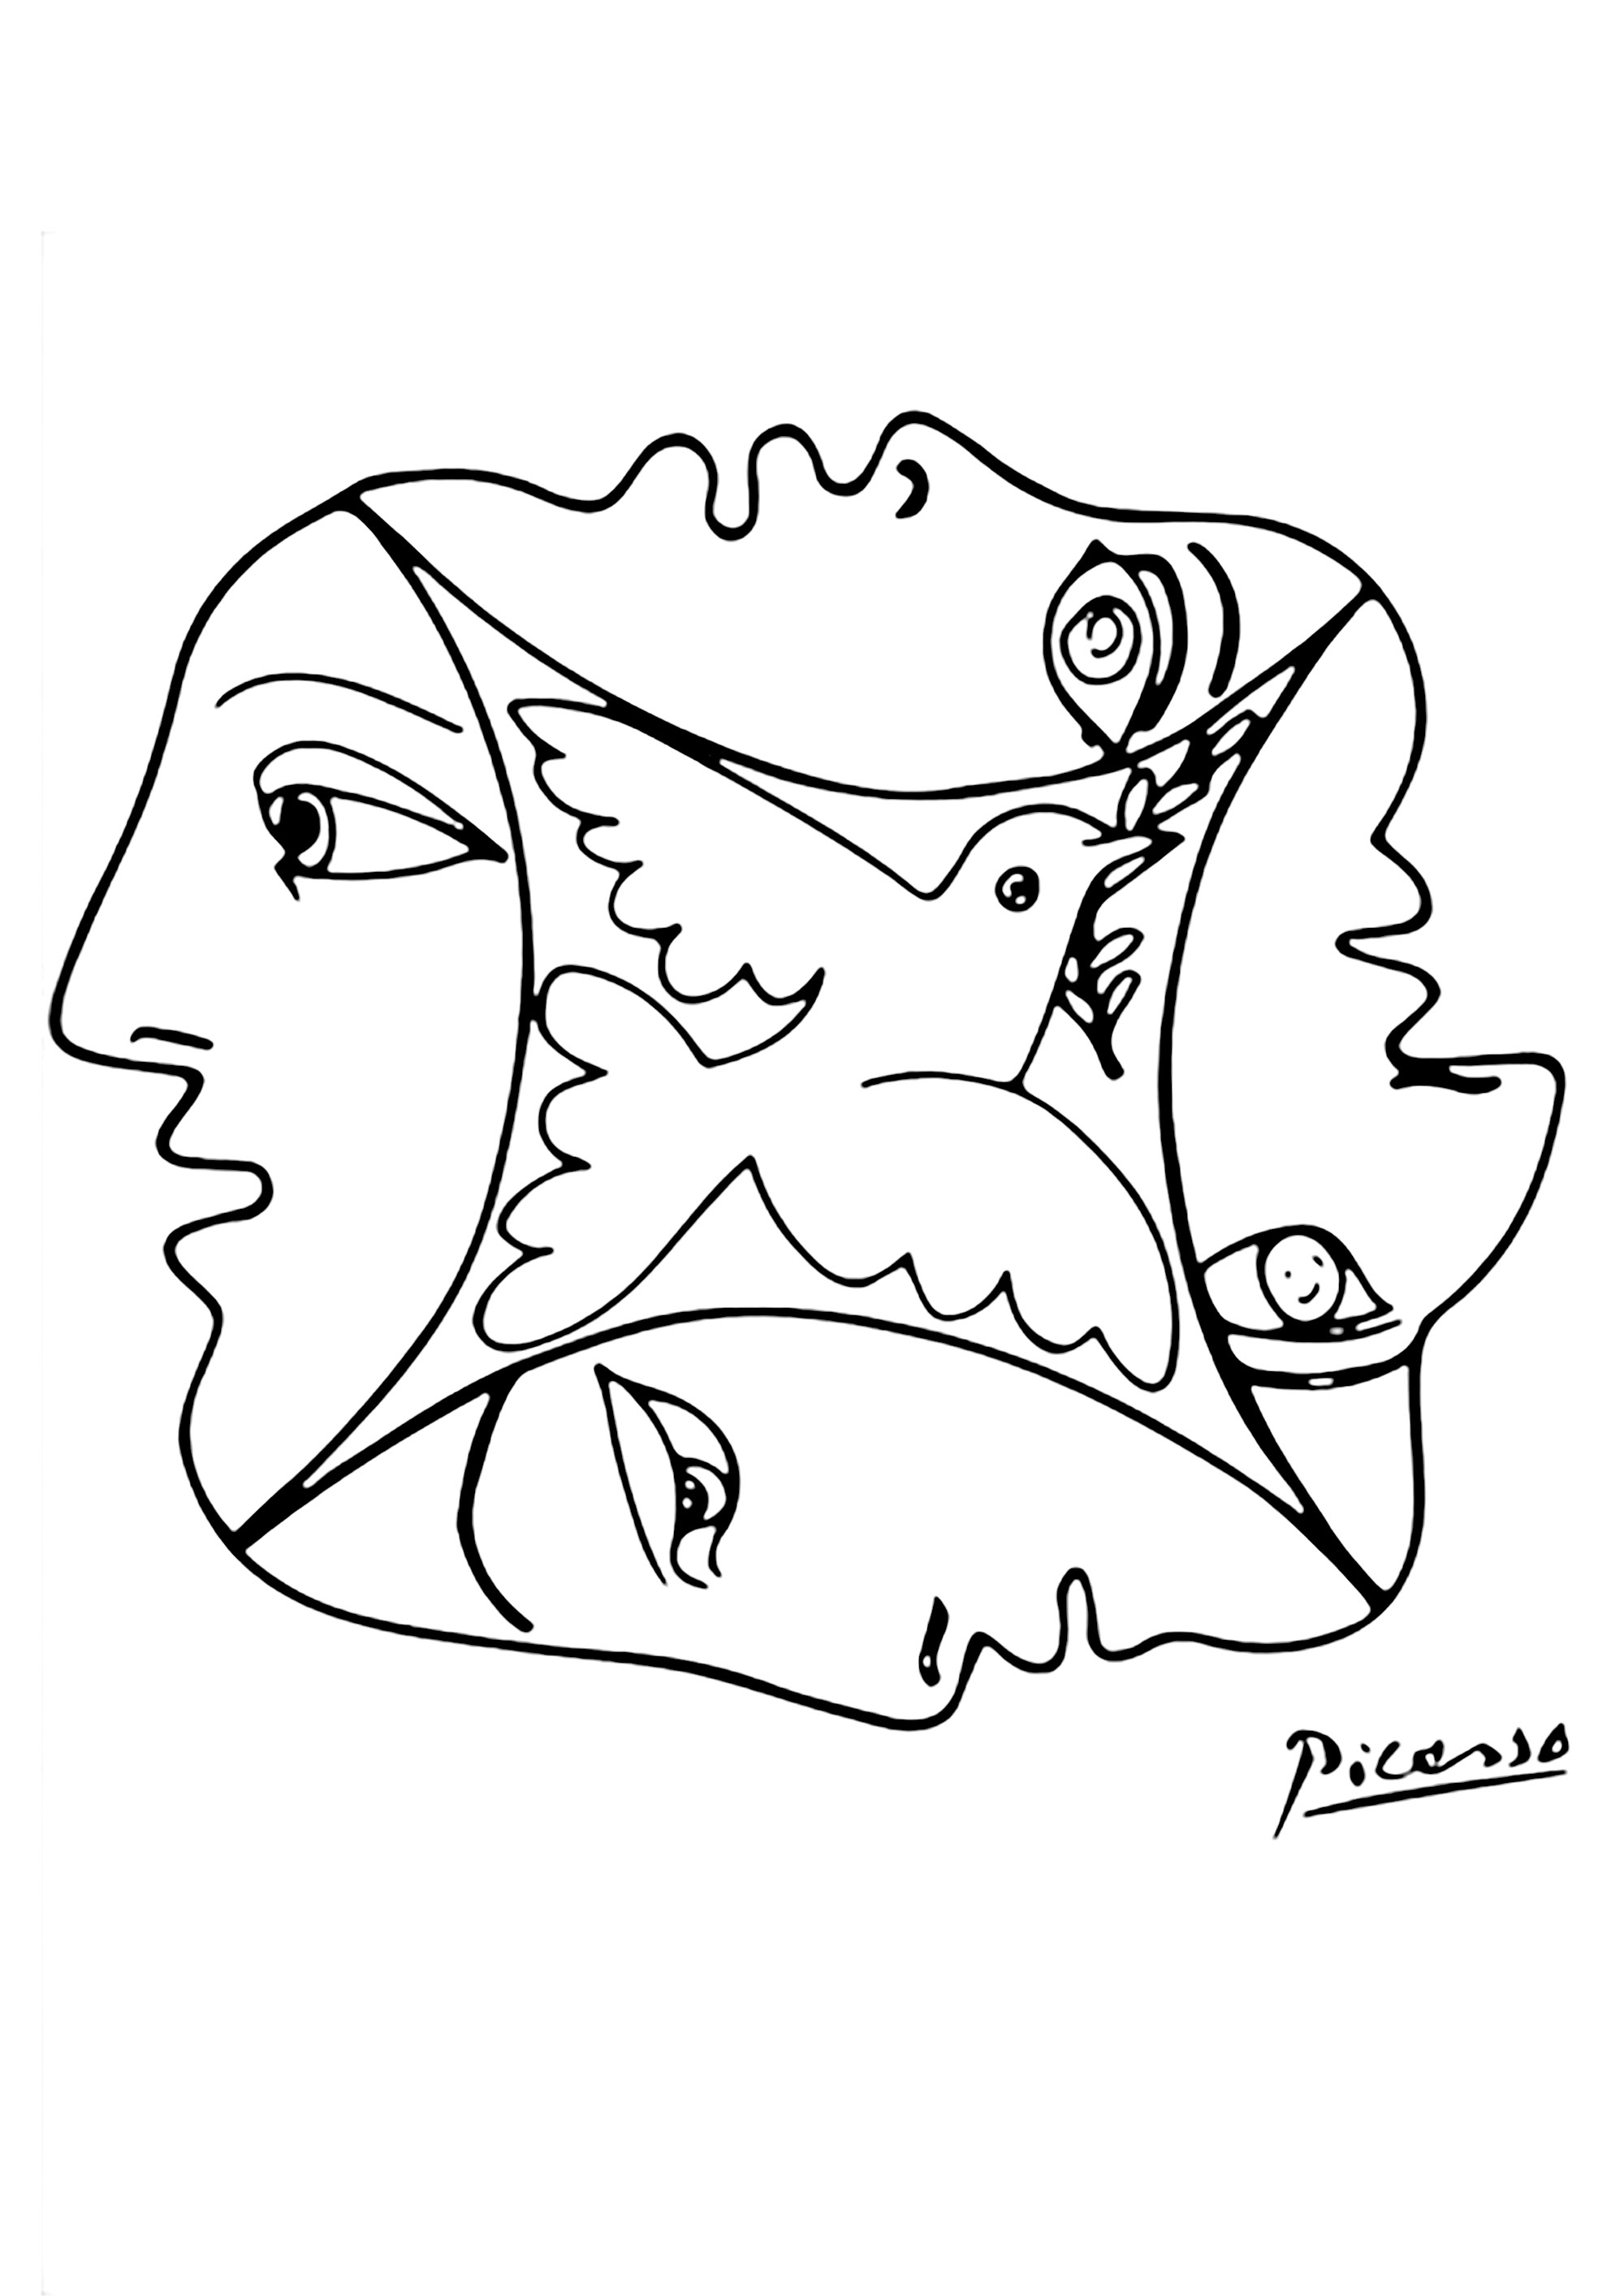 Coloring created from a drawing by Pablo Picasso with faces and a dove. Magnificent drawing symbolizing peace and fraternity